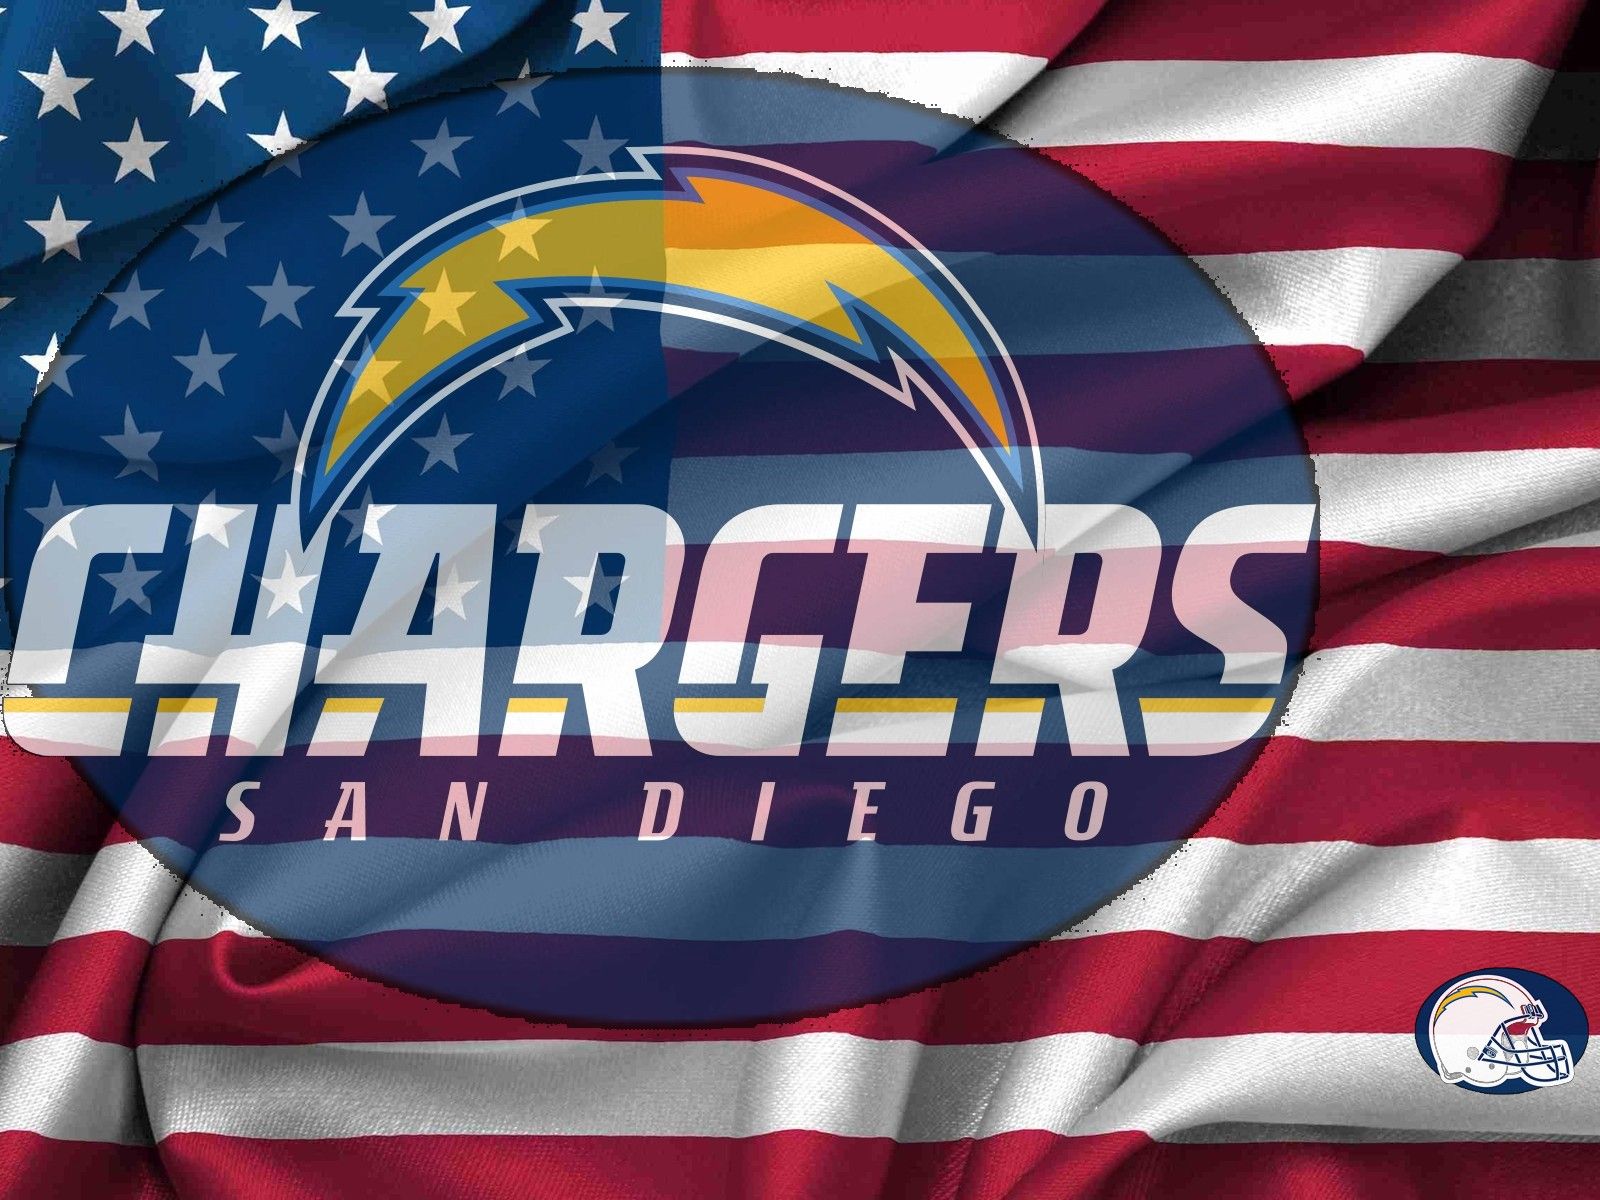 San Diego Chargers 2 | Chainimage